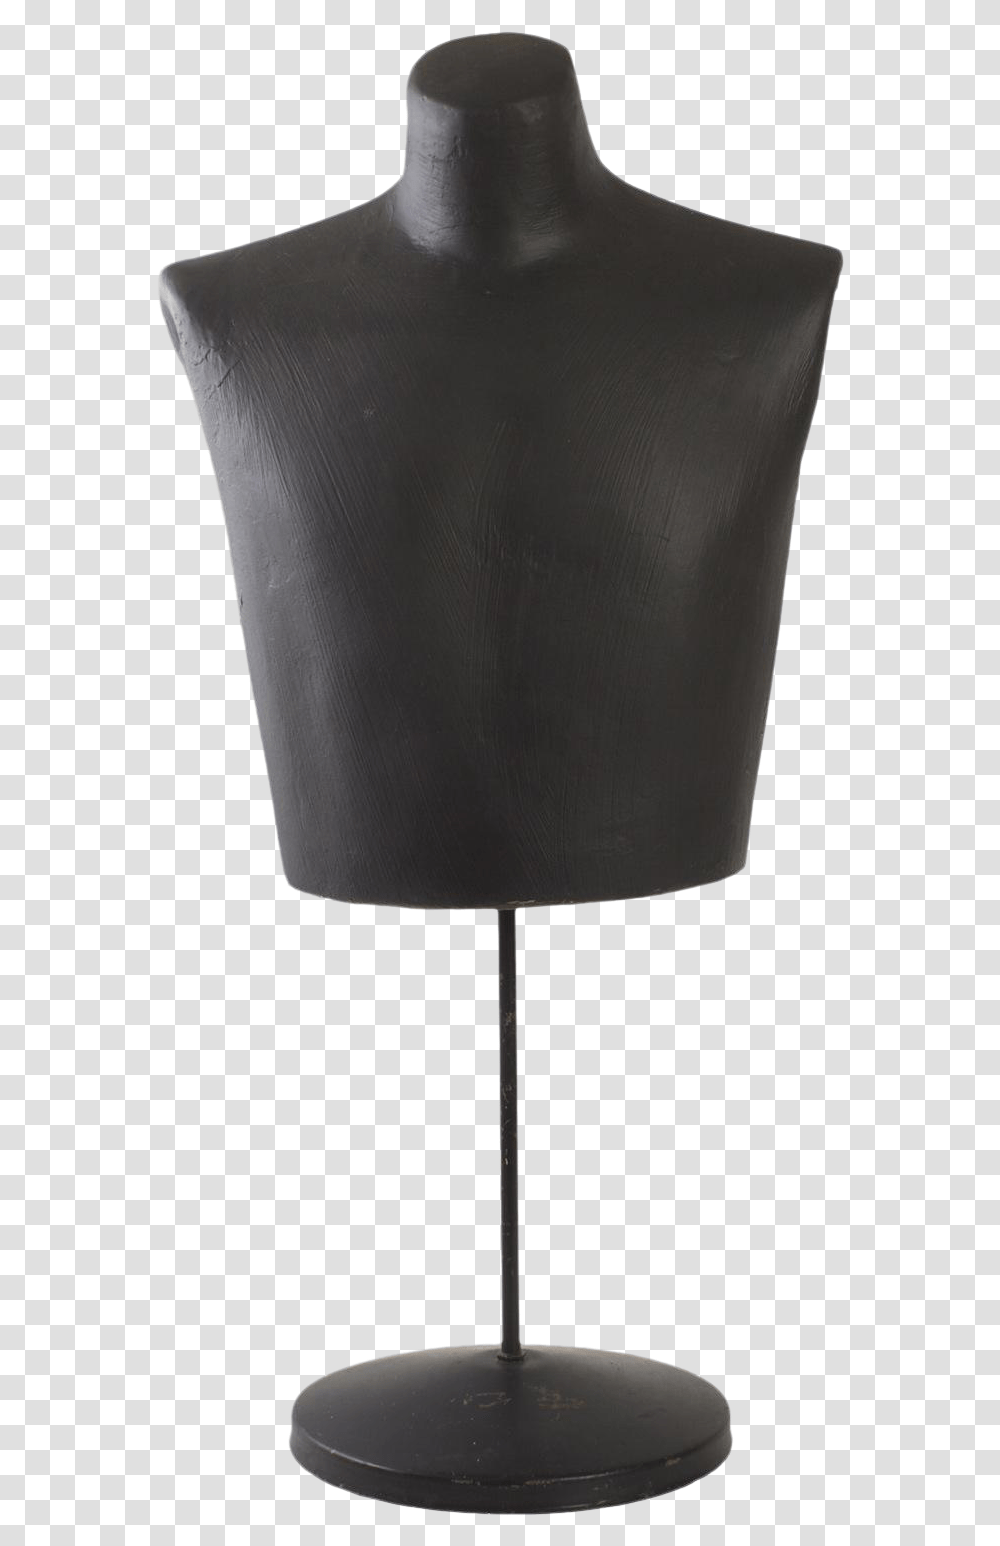 Clip Art On Stand Chairish Mannequin, Lamp, Apparel, Lampshade Transparent Png